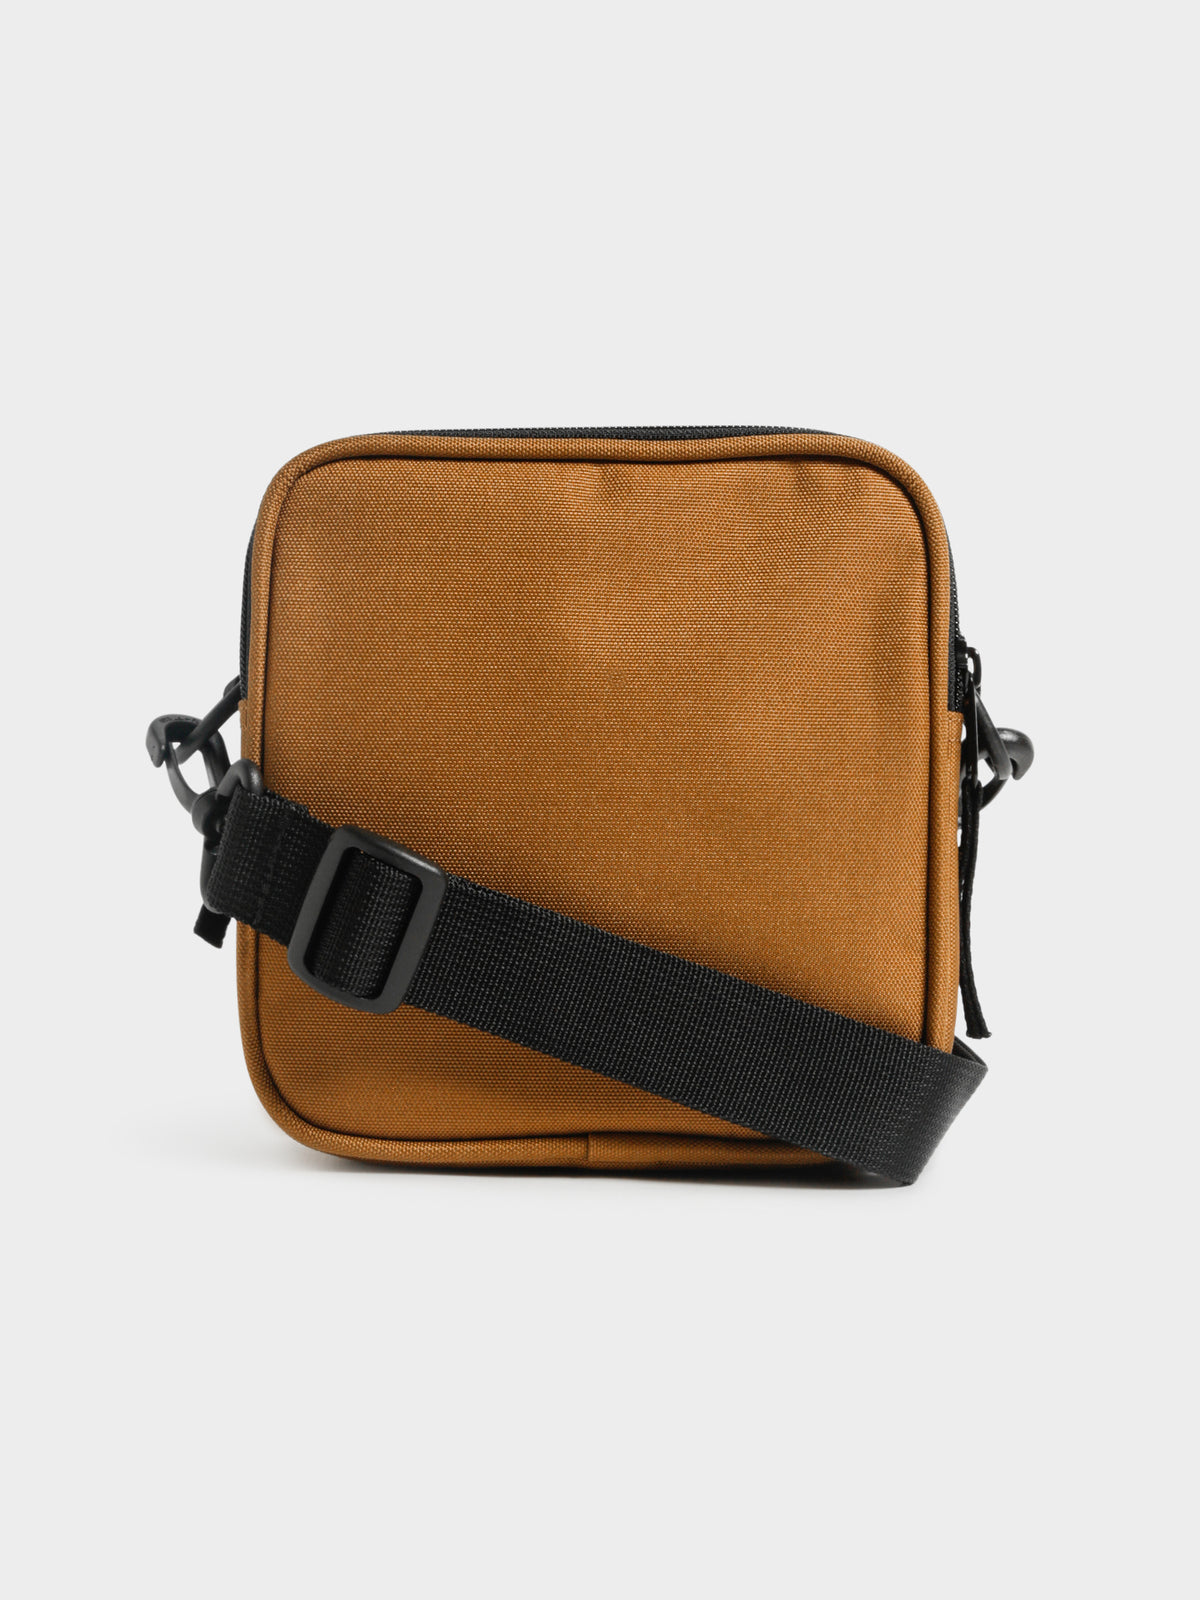 Essentials Small Bag in Dusty Brown